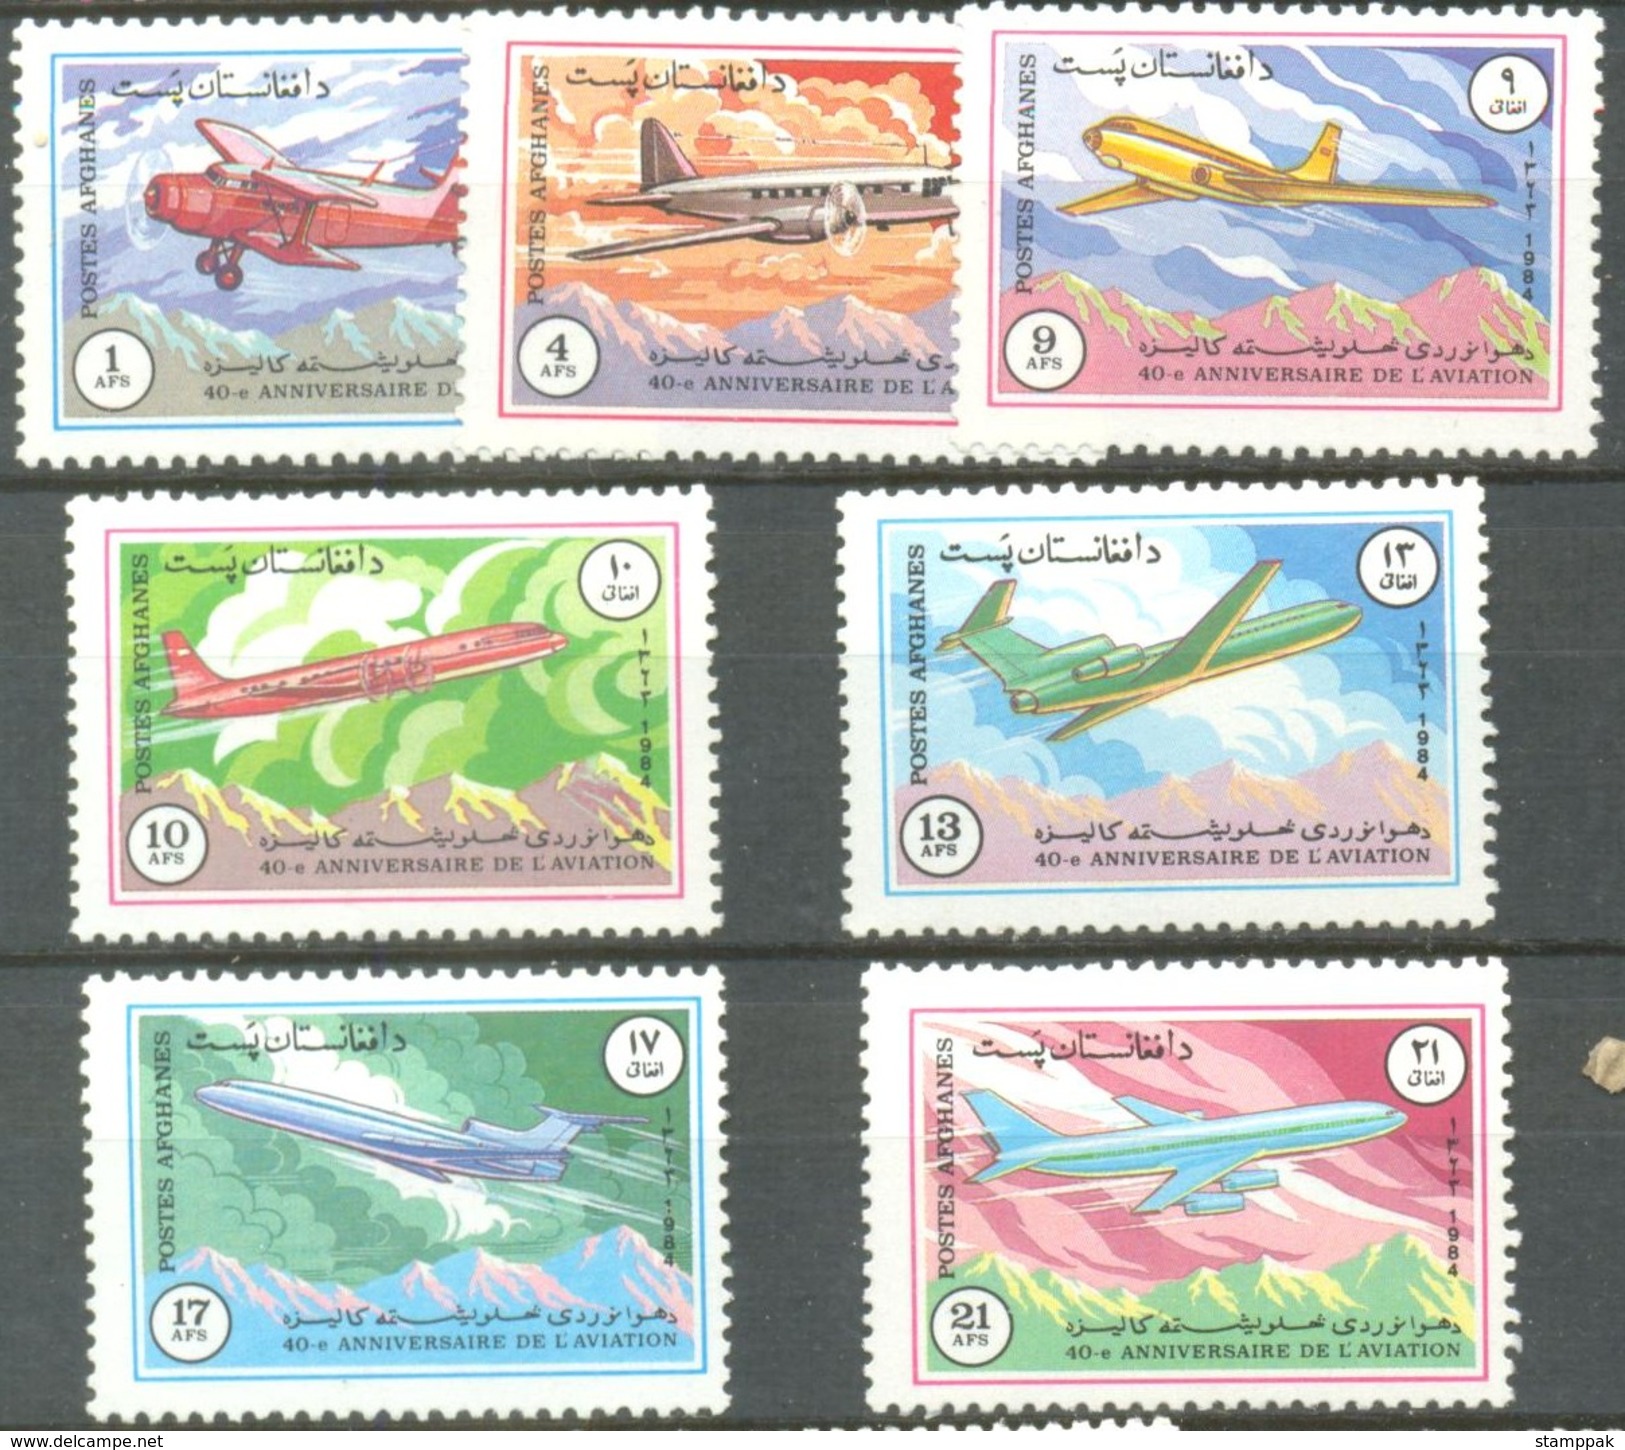 AFGHANISTAN:AIRPLANES,TRANSPORTATION,AIRCRAFT,AVIATION,1090-96,1984,MNH - Afghanistan